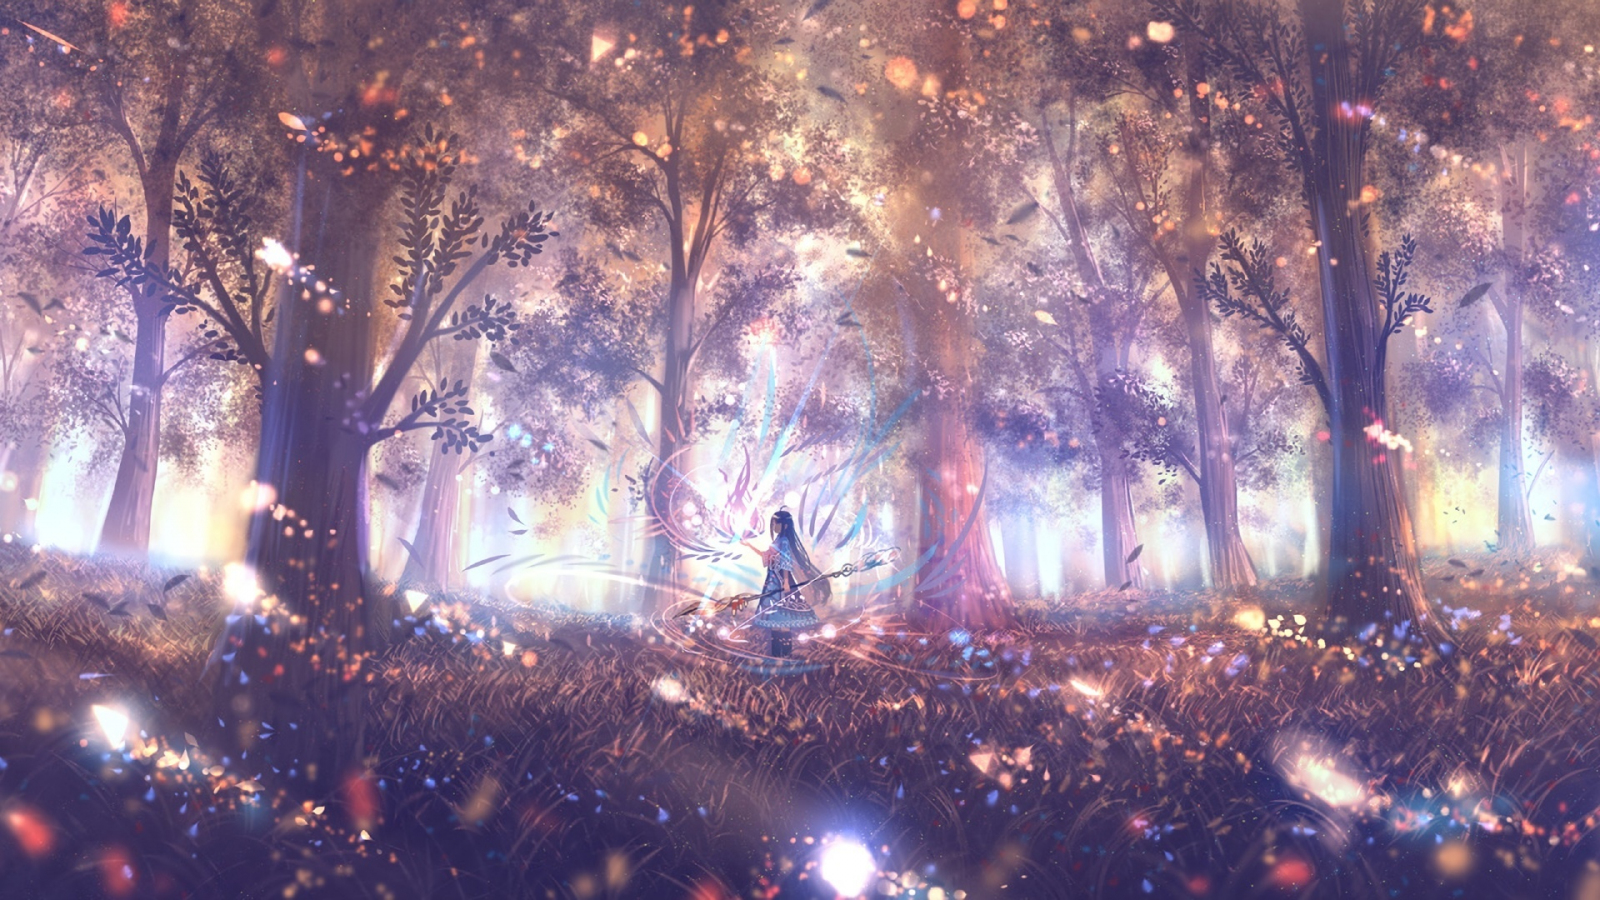 Wallpaper ylpylf, original Anime female forest Trees frock 1600x1200